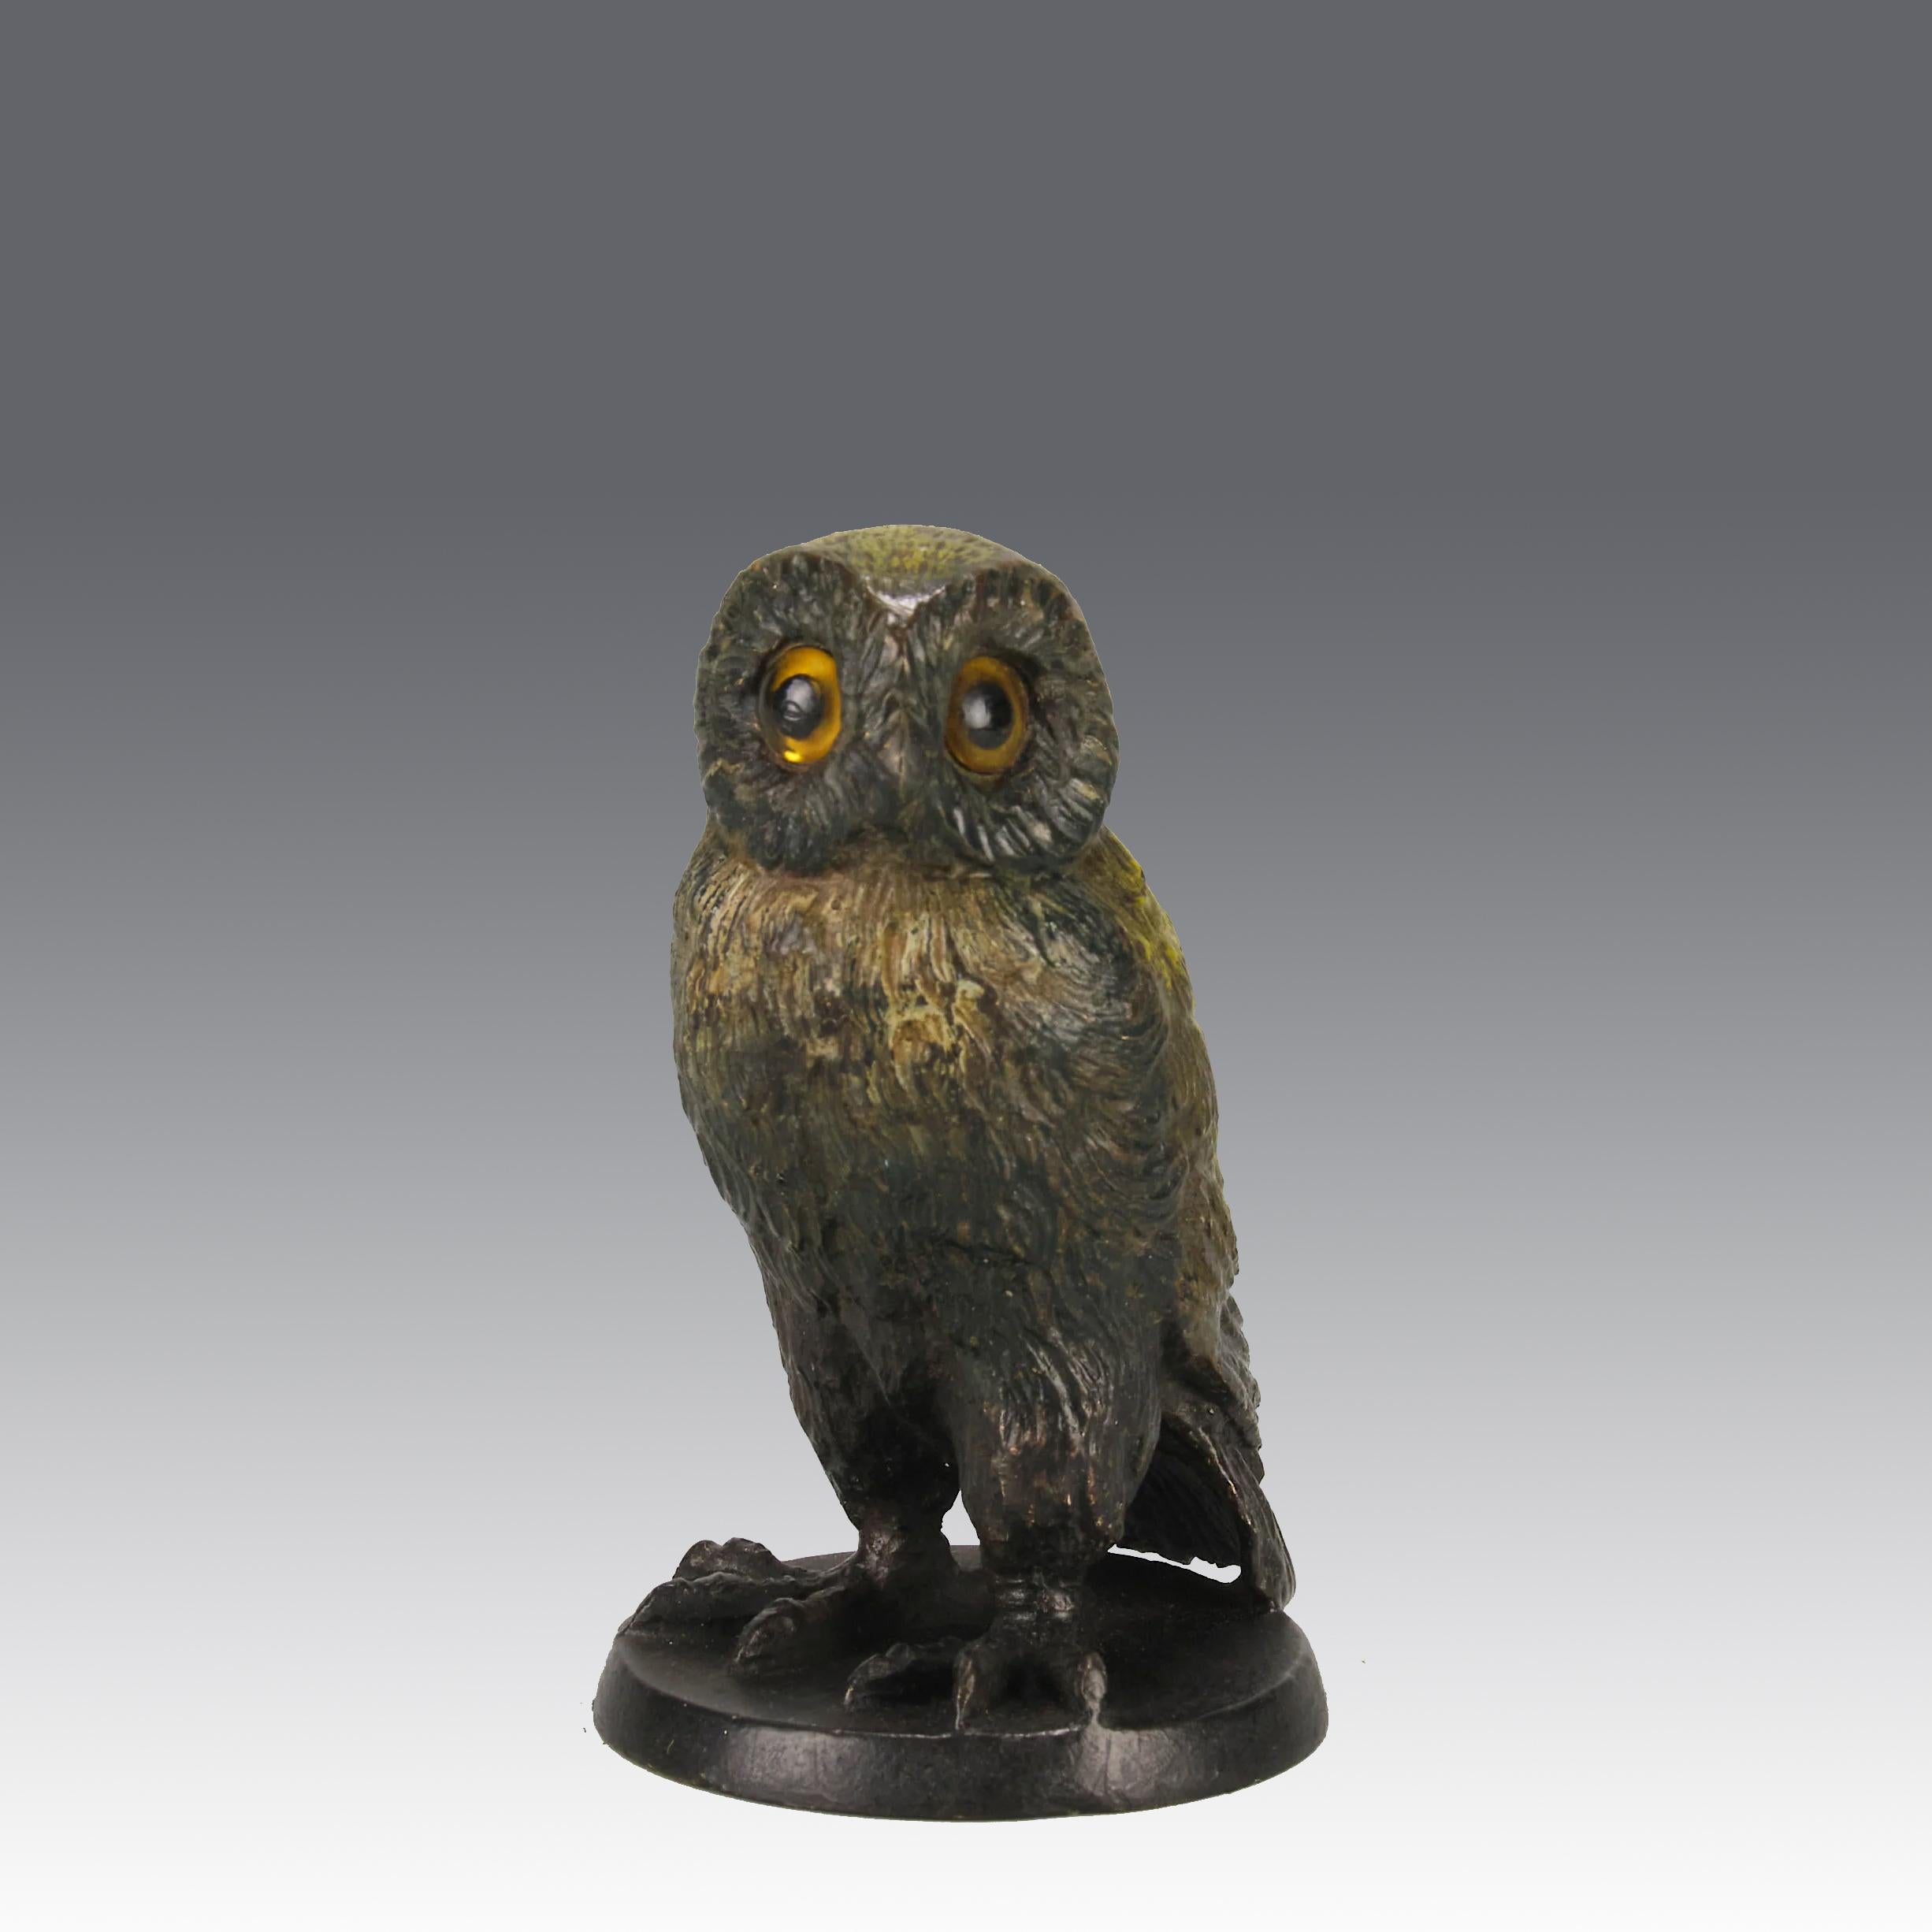 A very fine early 20th Century Austrian bronze figure of a barn owl standing on an integral bronze plinth. The bronze study with glass eyes exhibting excellent hand chased surface detail and good cold painted colours

ADDITIONAL INFORMATION
Height: 